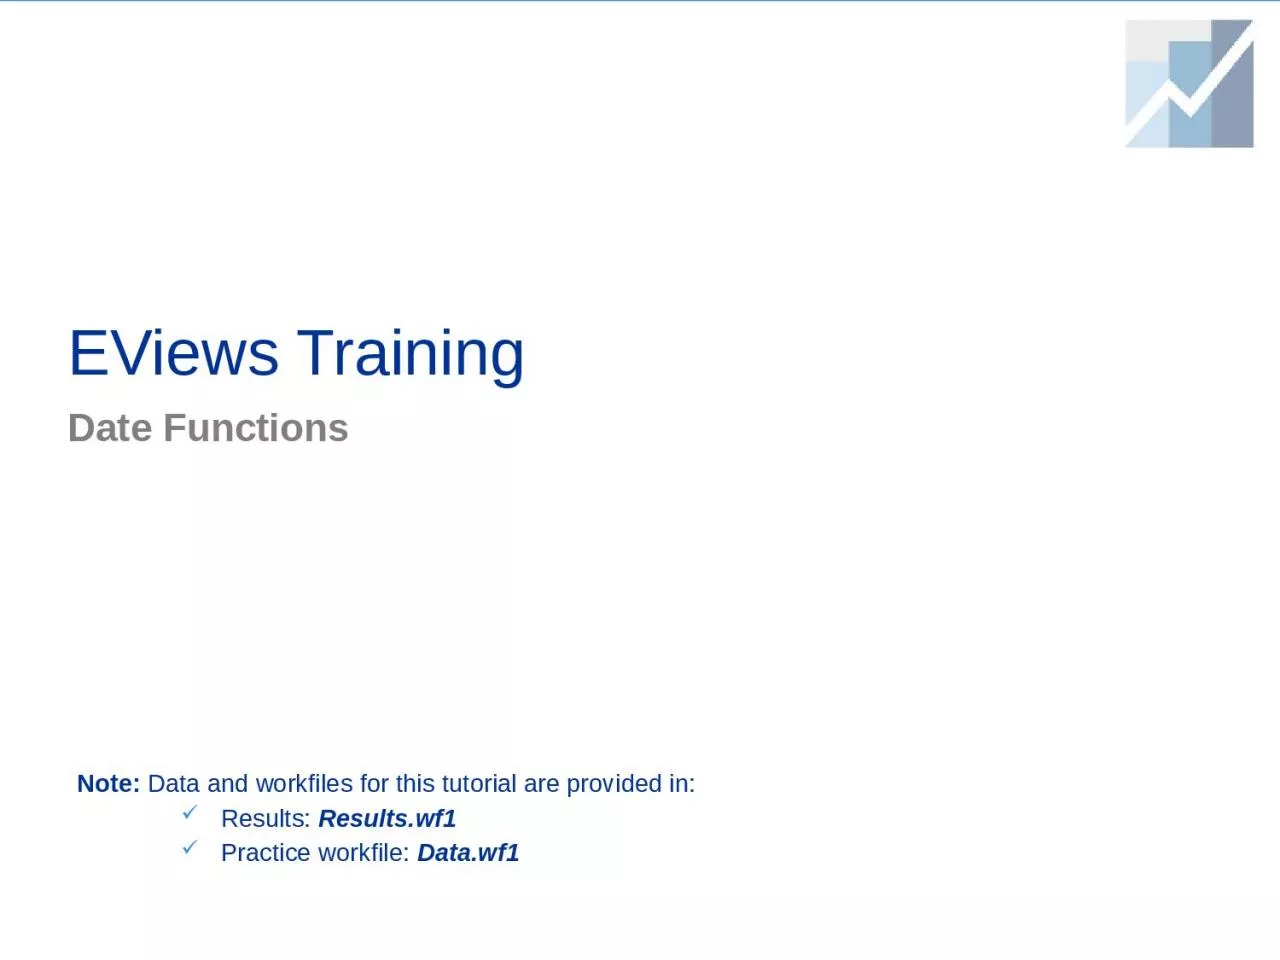 EViews Training Date Functions